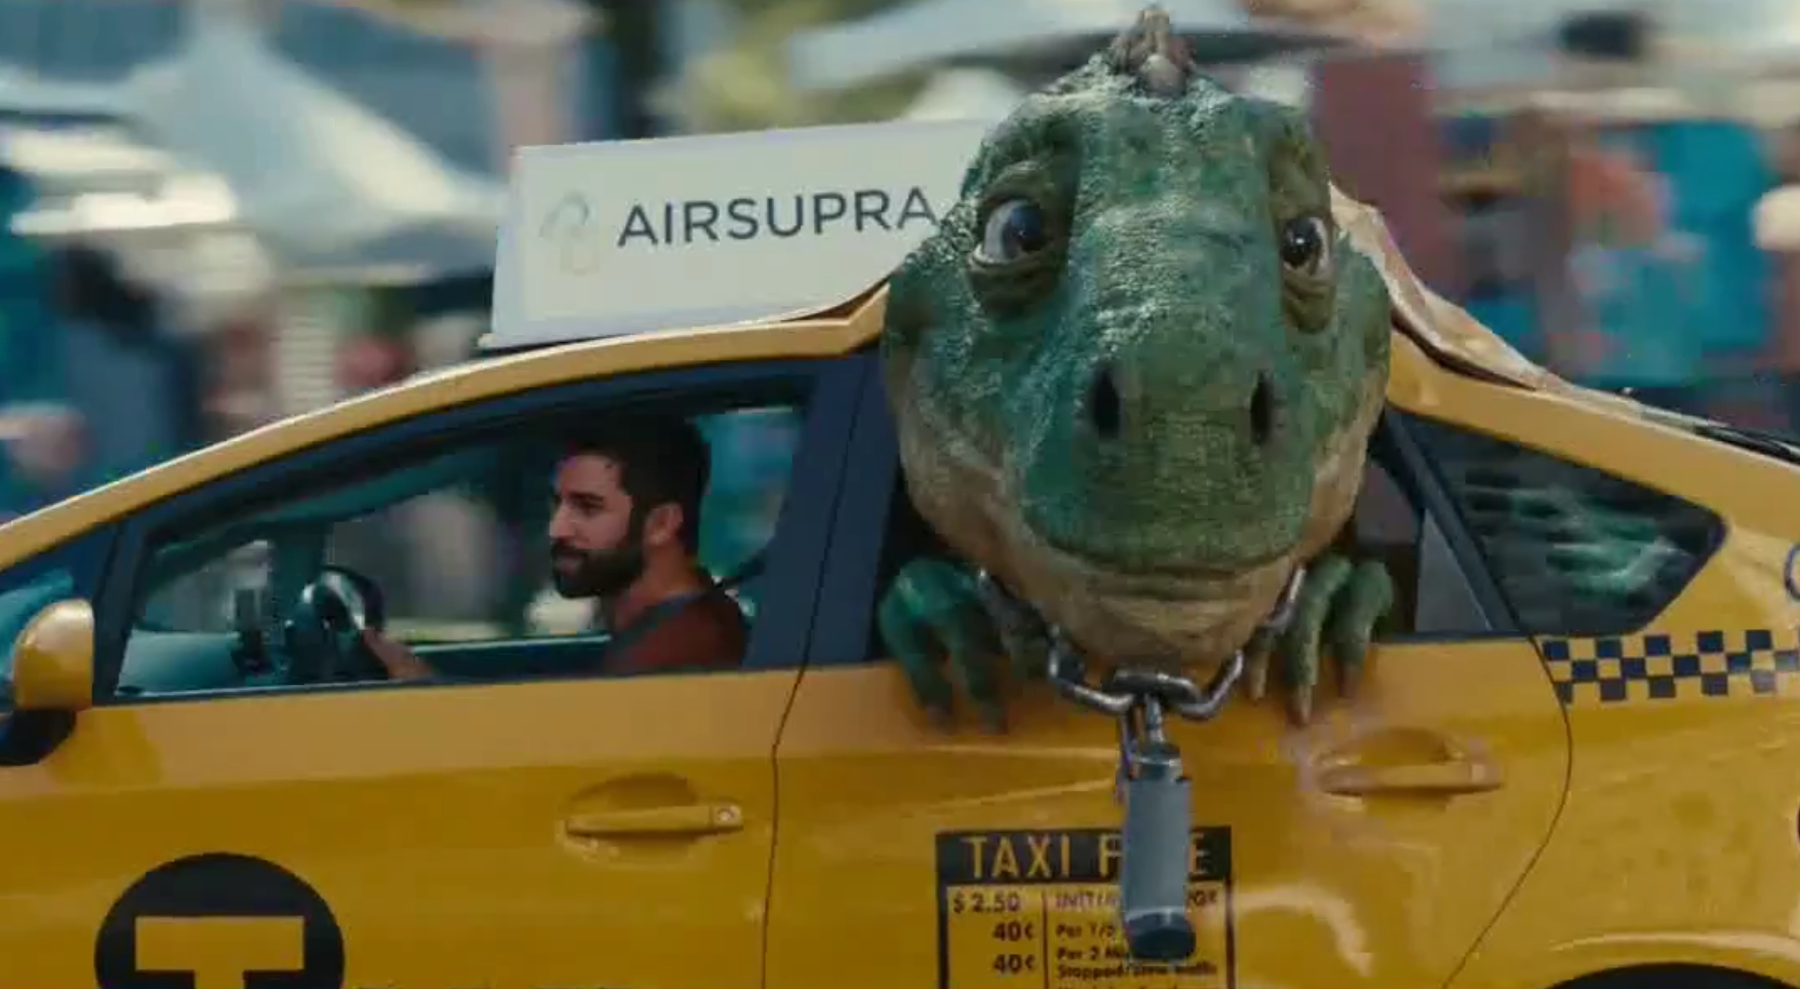 A frame from AstraZenecas Airsupra ad showing a dinosaur in a taxi